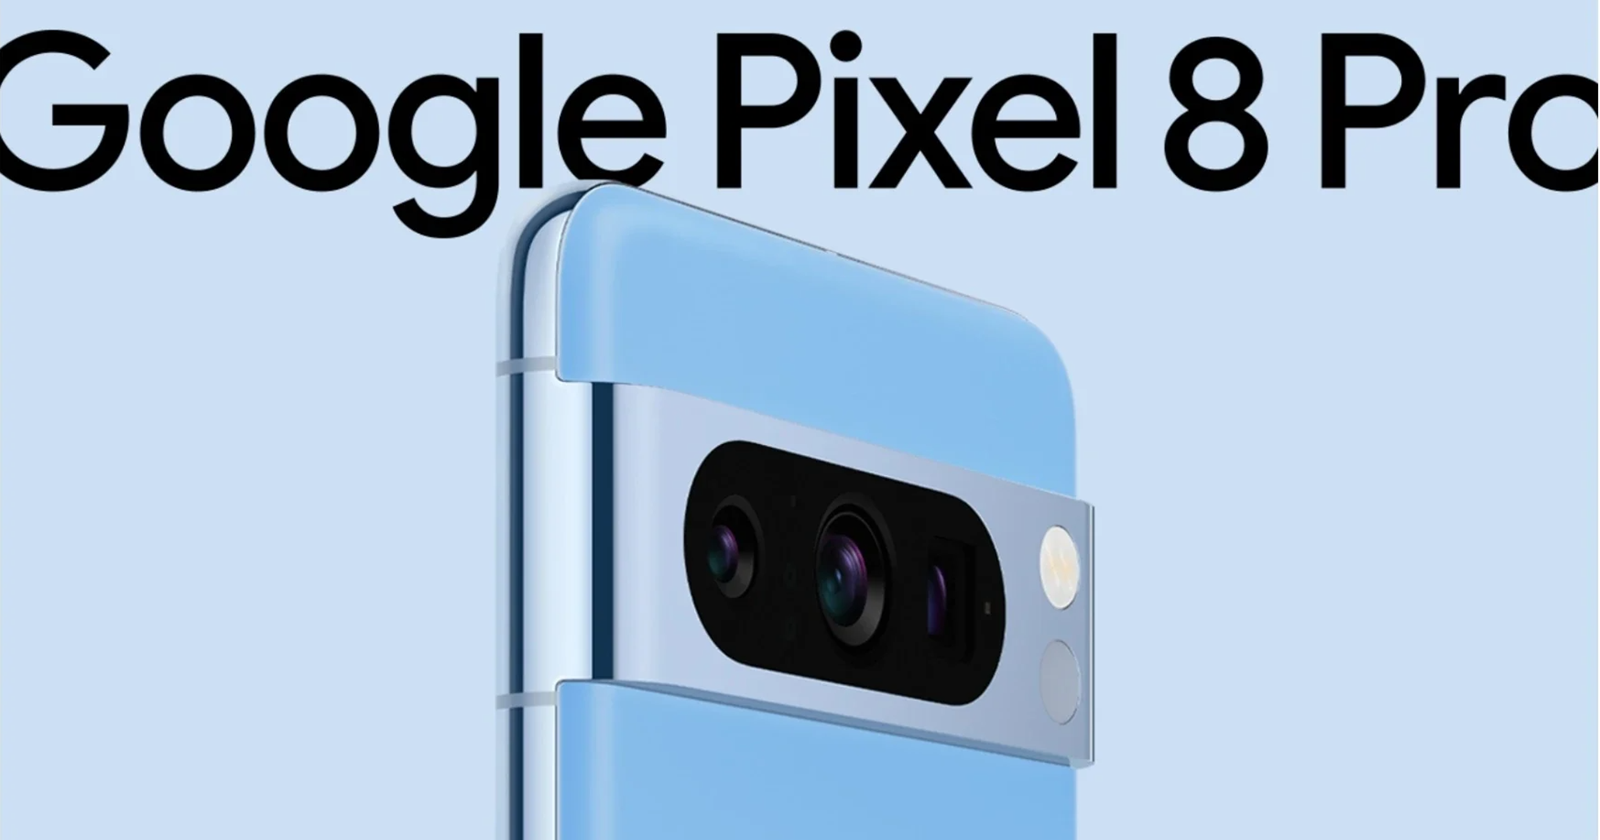 You can still score a Google Pixel 8 Pro for free with AT&T in the US